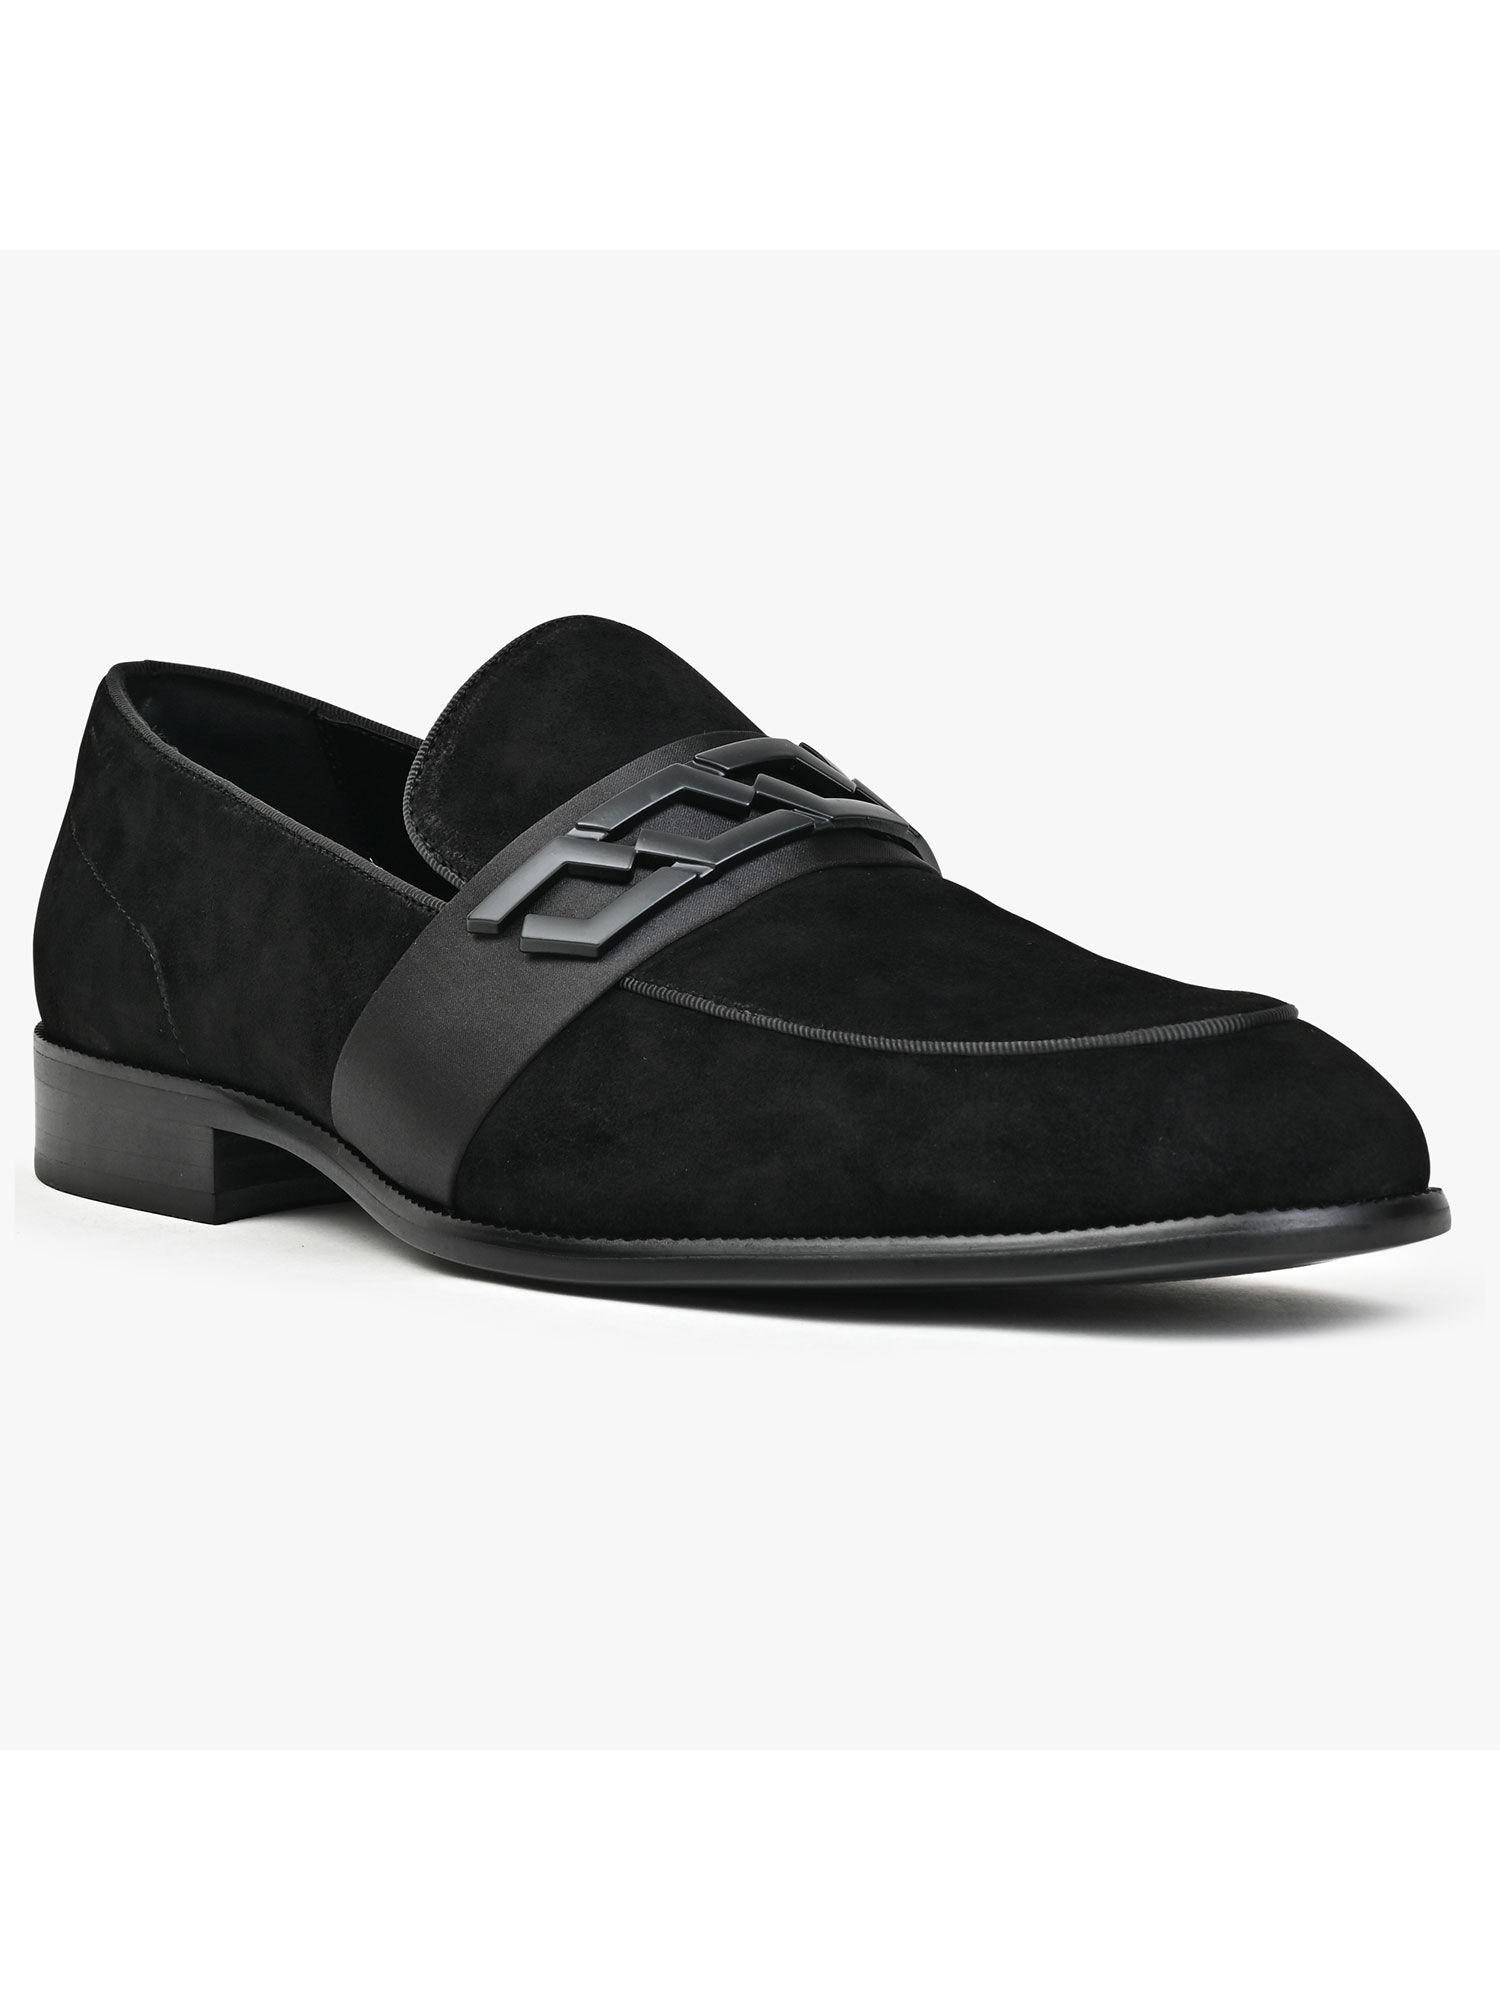 men casual loafers black